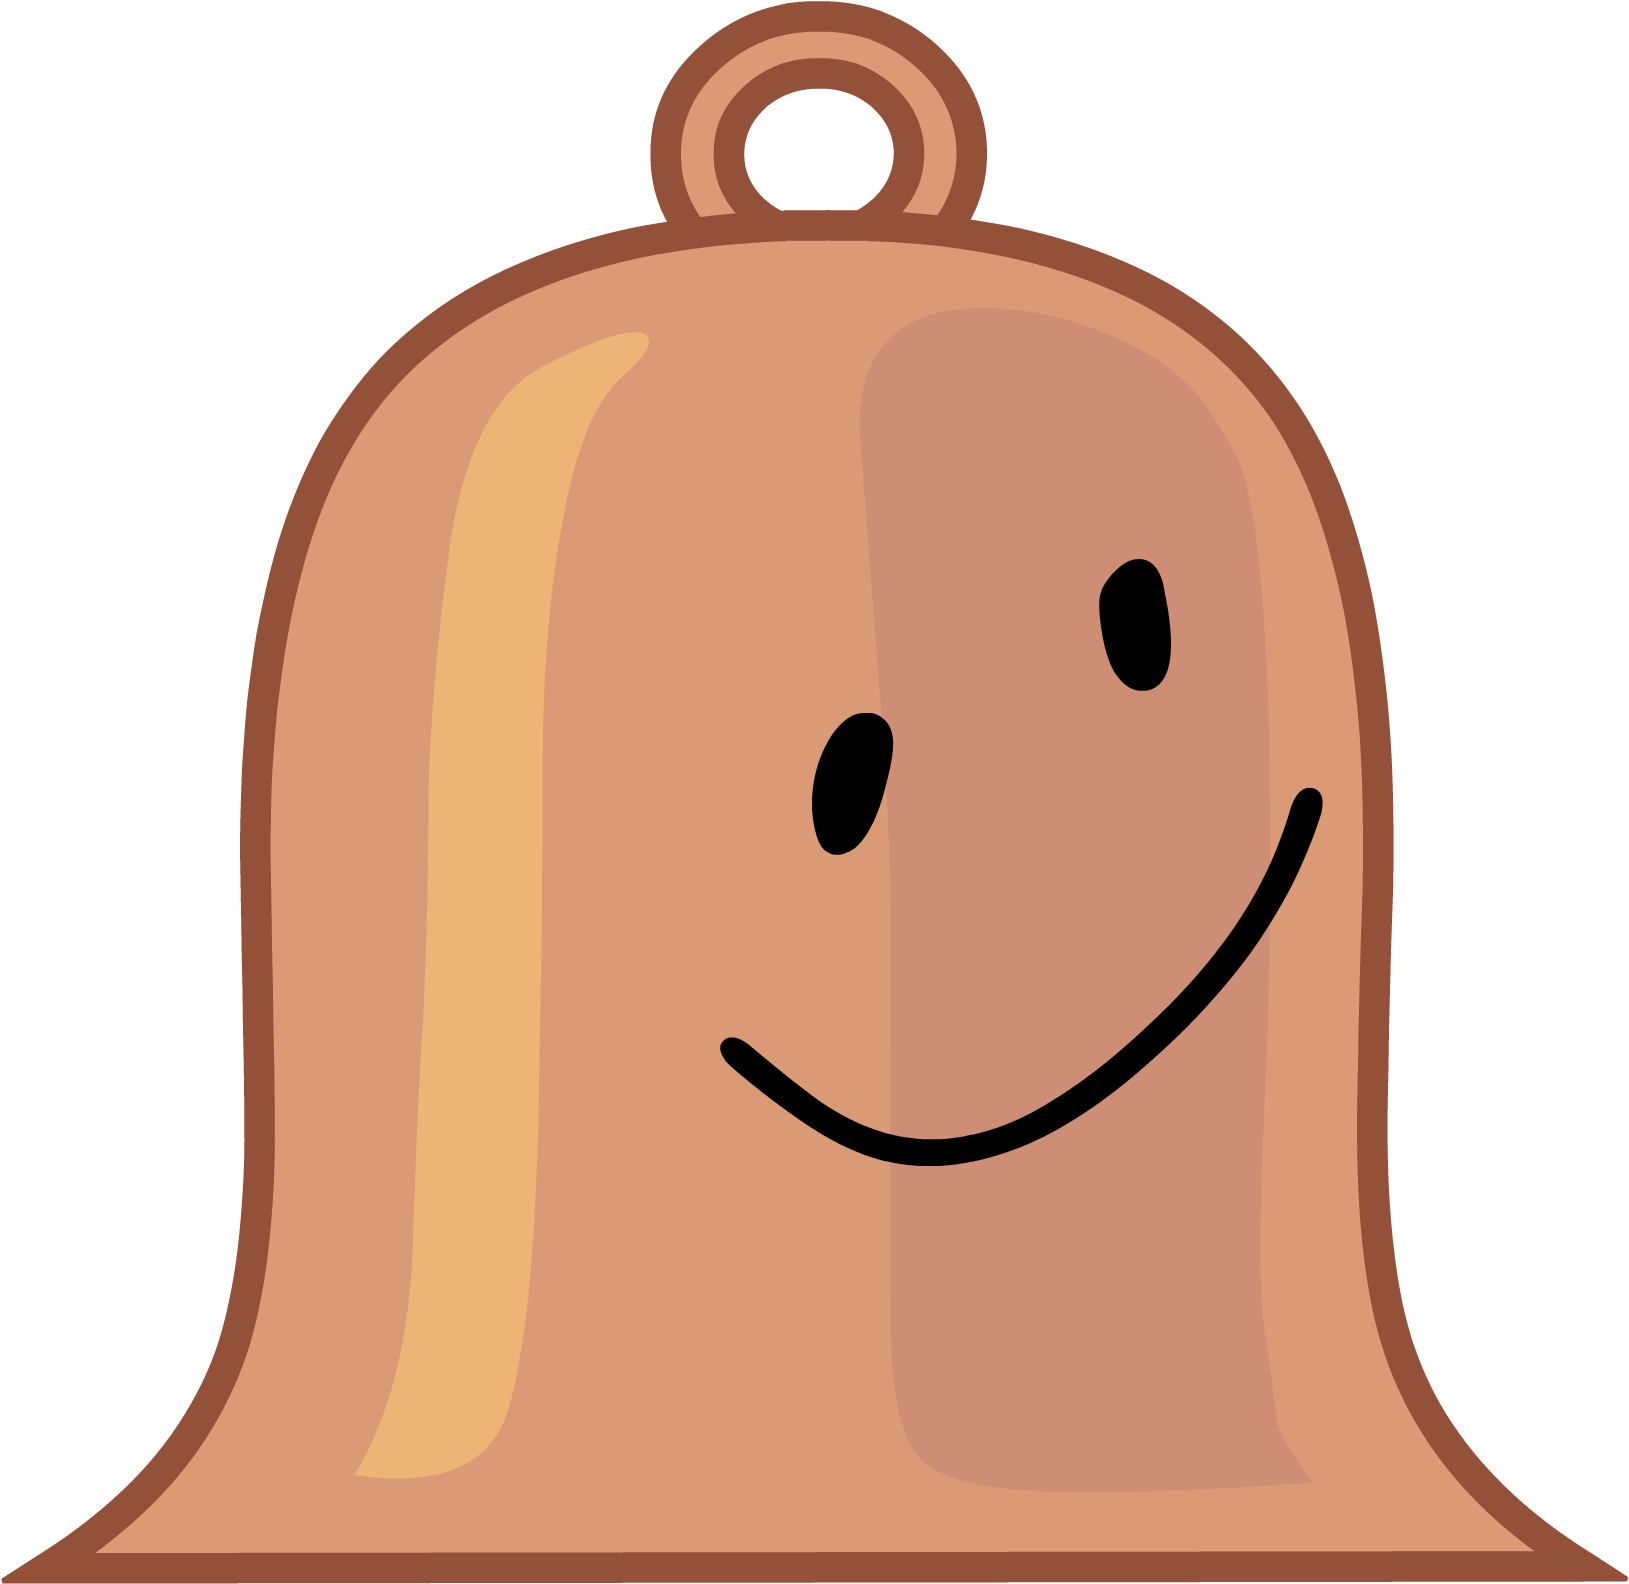 Bell Intro - Bfb Bell Body (1682x1648)